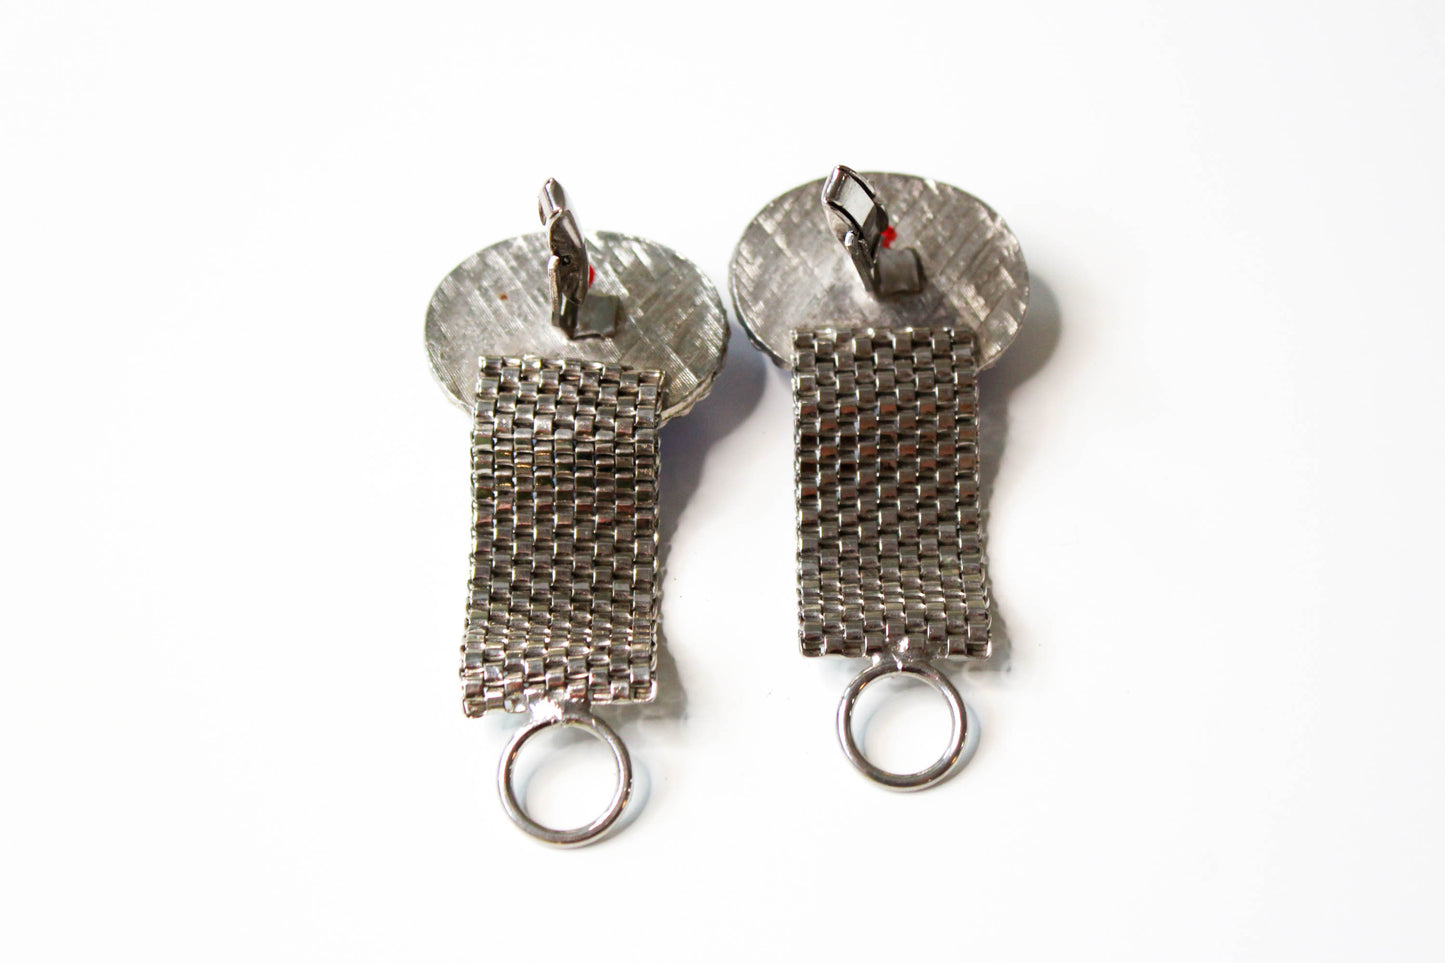 vintage silver mesh wraparound cufflinks with large blue glass oval cabochons, braided border